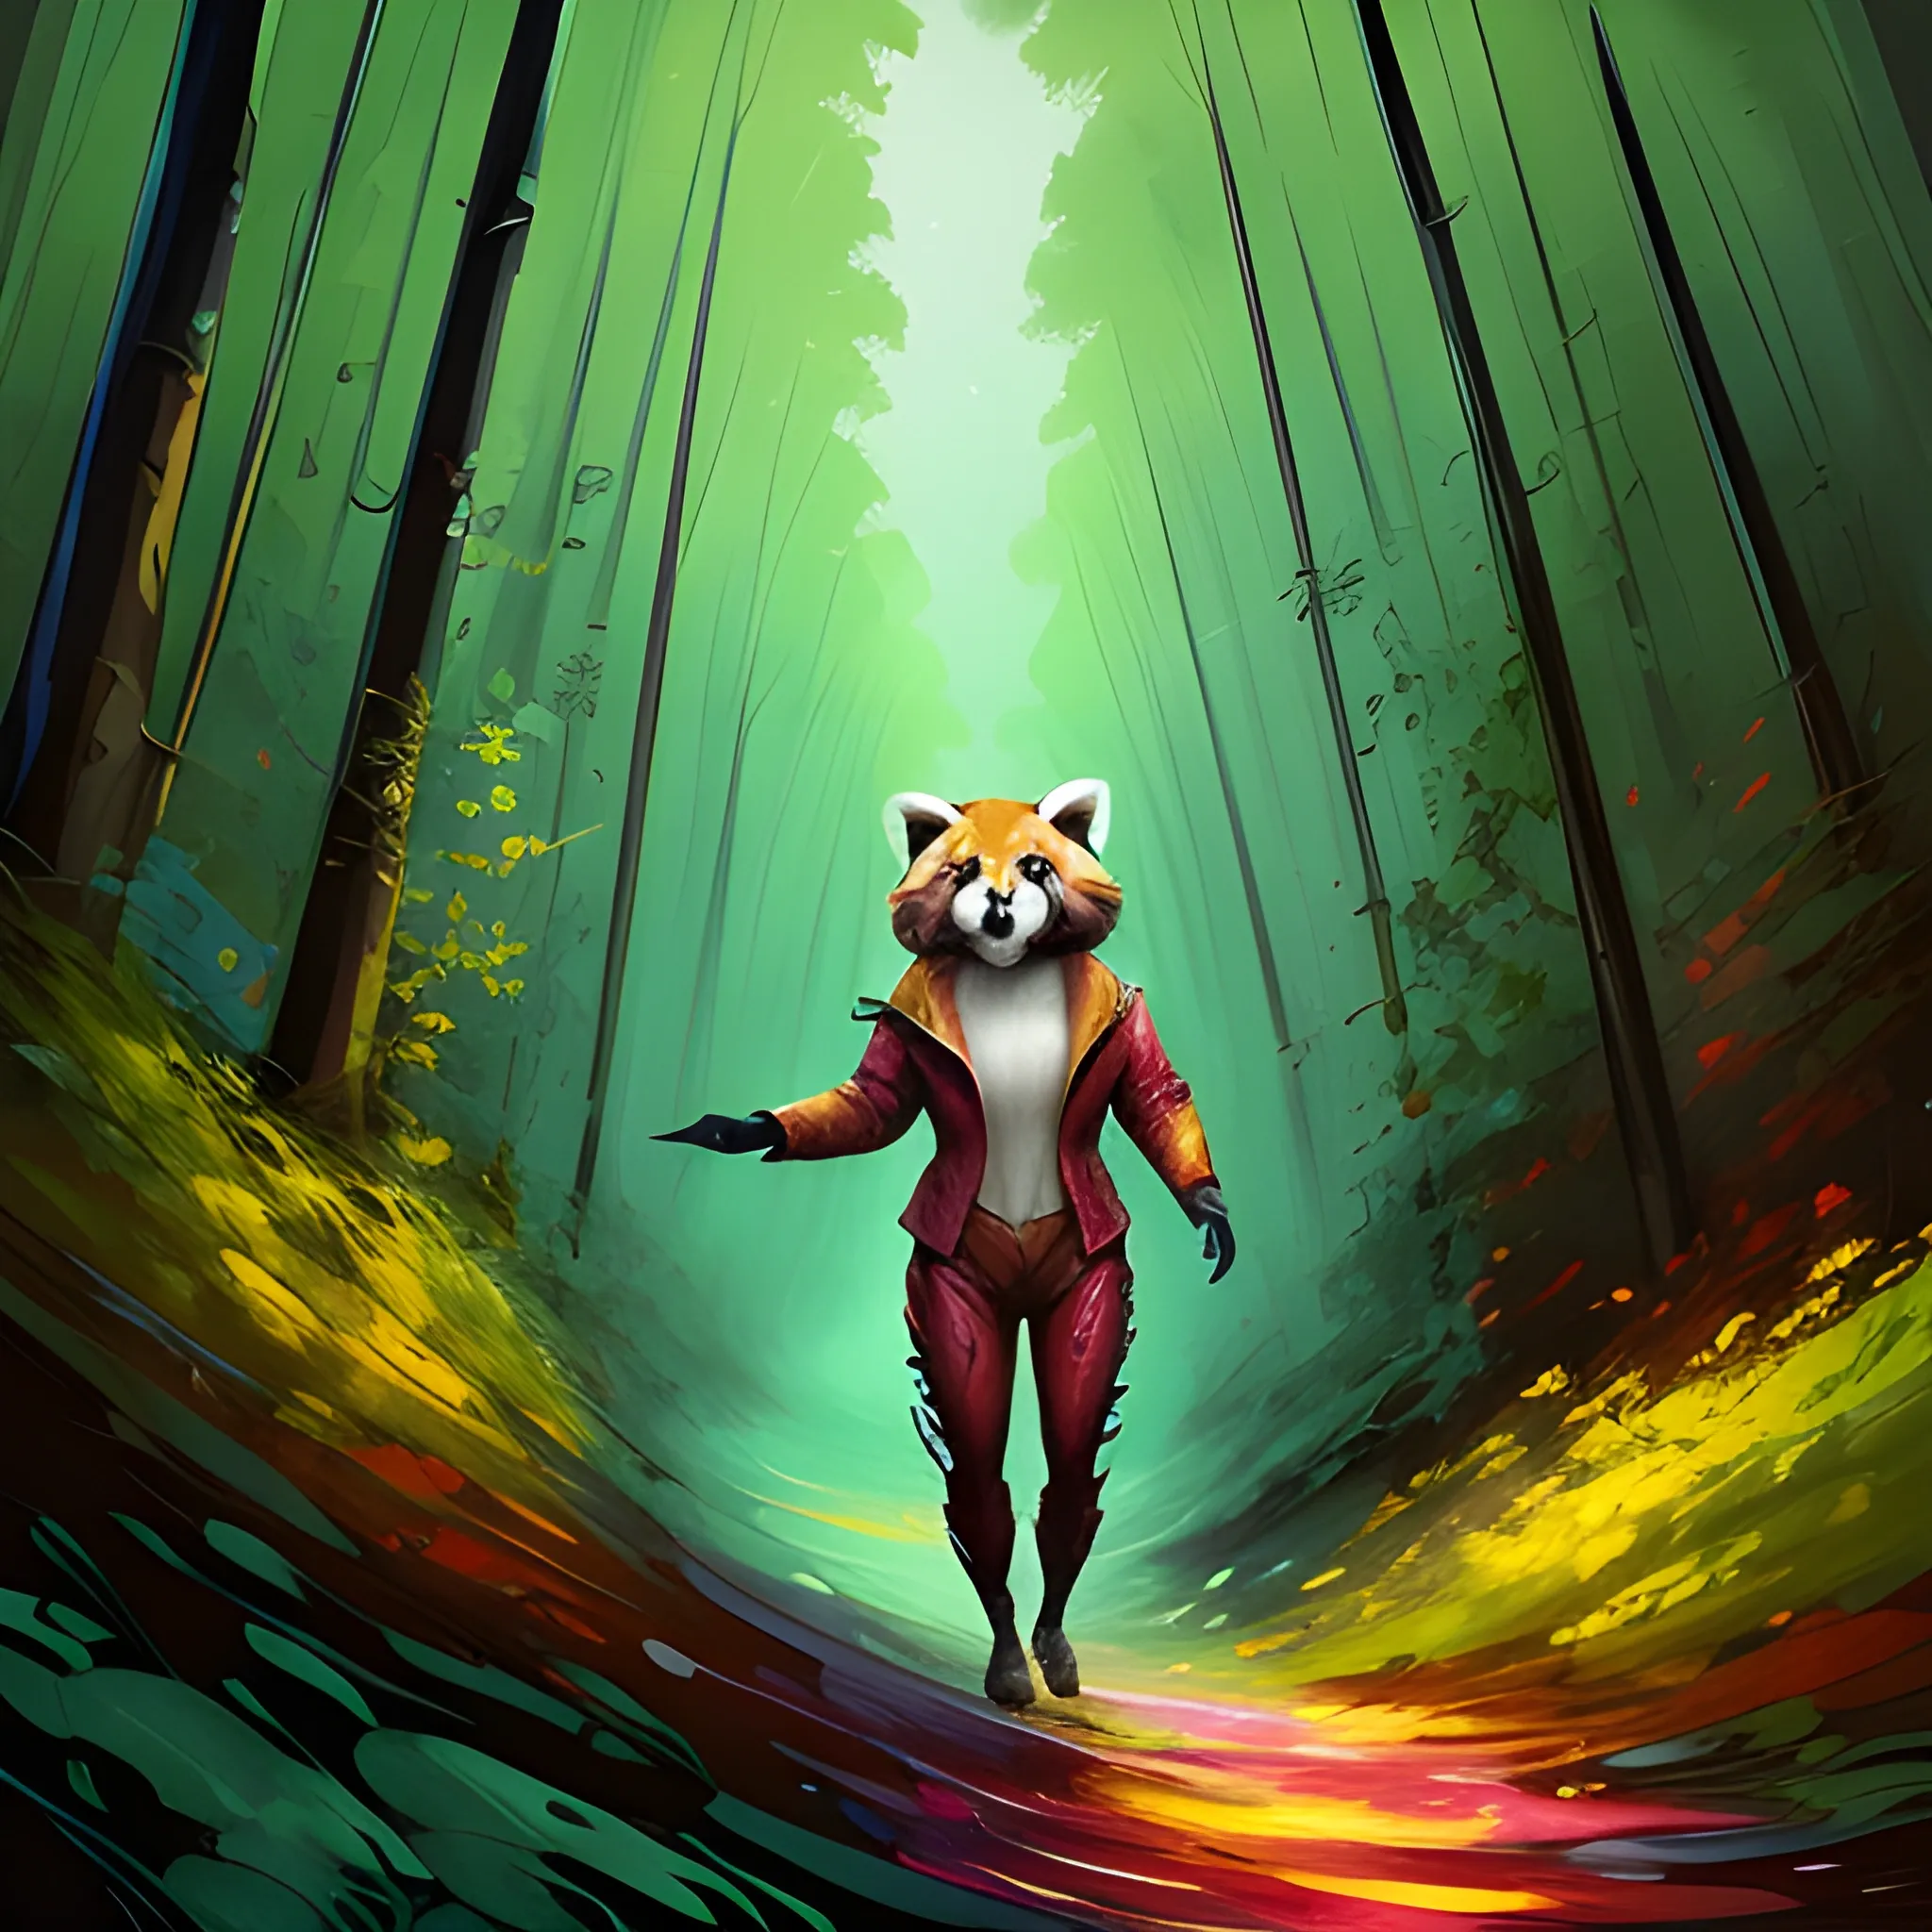 Strybk, happy red panda in floral print hoodie, full body walks through the forest((in the background is a forest))
Michael Garmash, Daniel F. Gerhartz, strebk style, night, dreamy warm lighting, volumetric lighting,
pulp adventure style, liquid acrylic, dynamic gradients, deep color, illustration, highly detailed vector curves,
simple, smooth and clean, vector art, smoothness, Johan Grenier, character design, 3D shading, cinematography, ornate pattern,
elegant organic framing, hyperrealism, posterization, masterpiece collection, bright rich colors, partial shade, wet gouache, 
children's storybook style, muted colors, watercolor style
